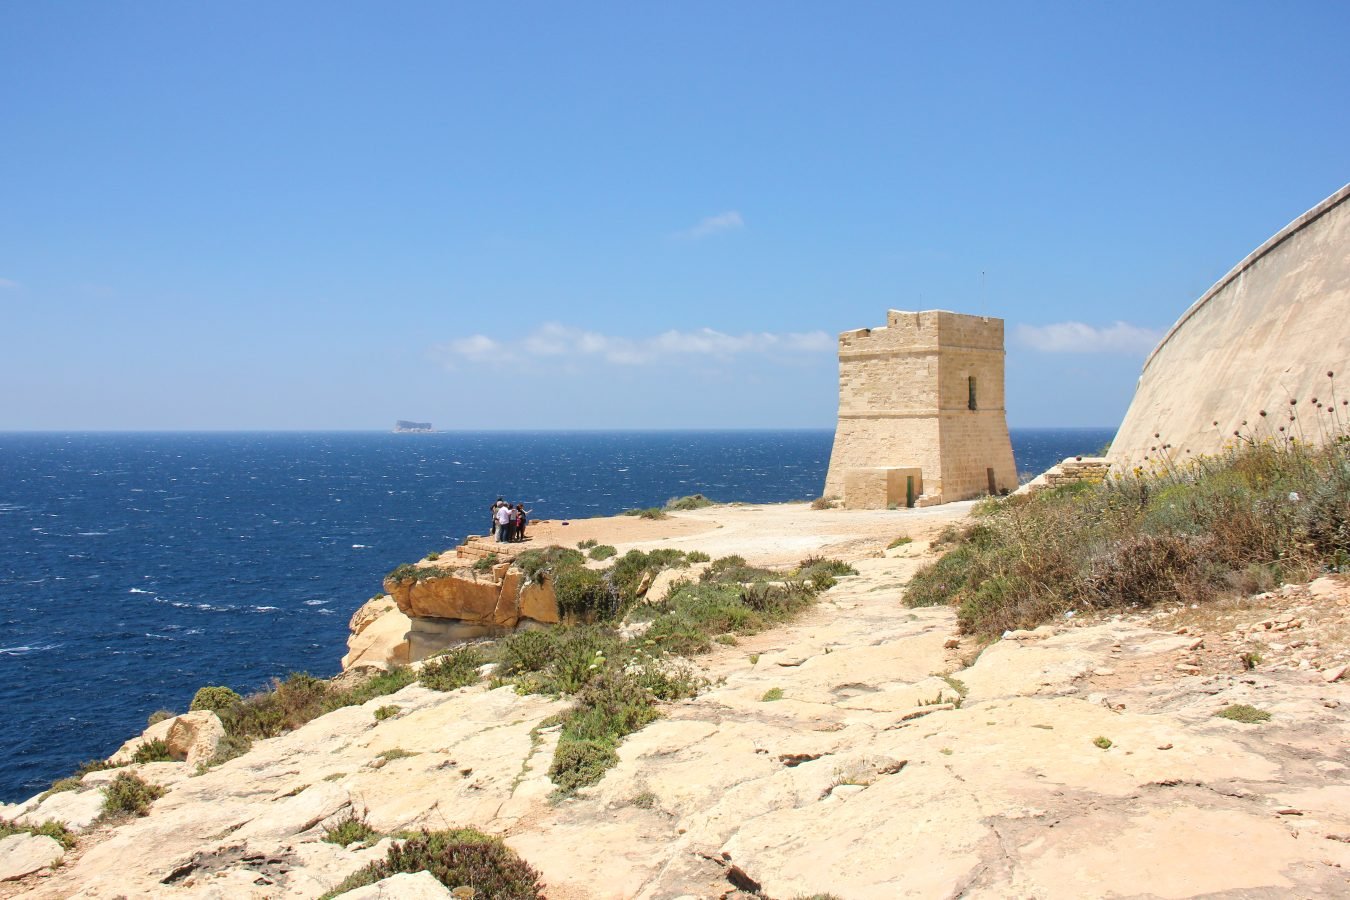 image of xutu tower in malta near blue grotto on a cliff overlooking the sea